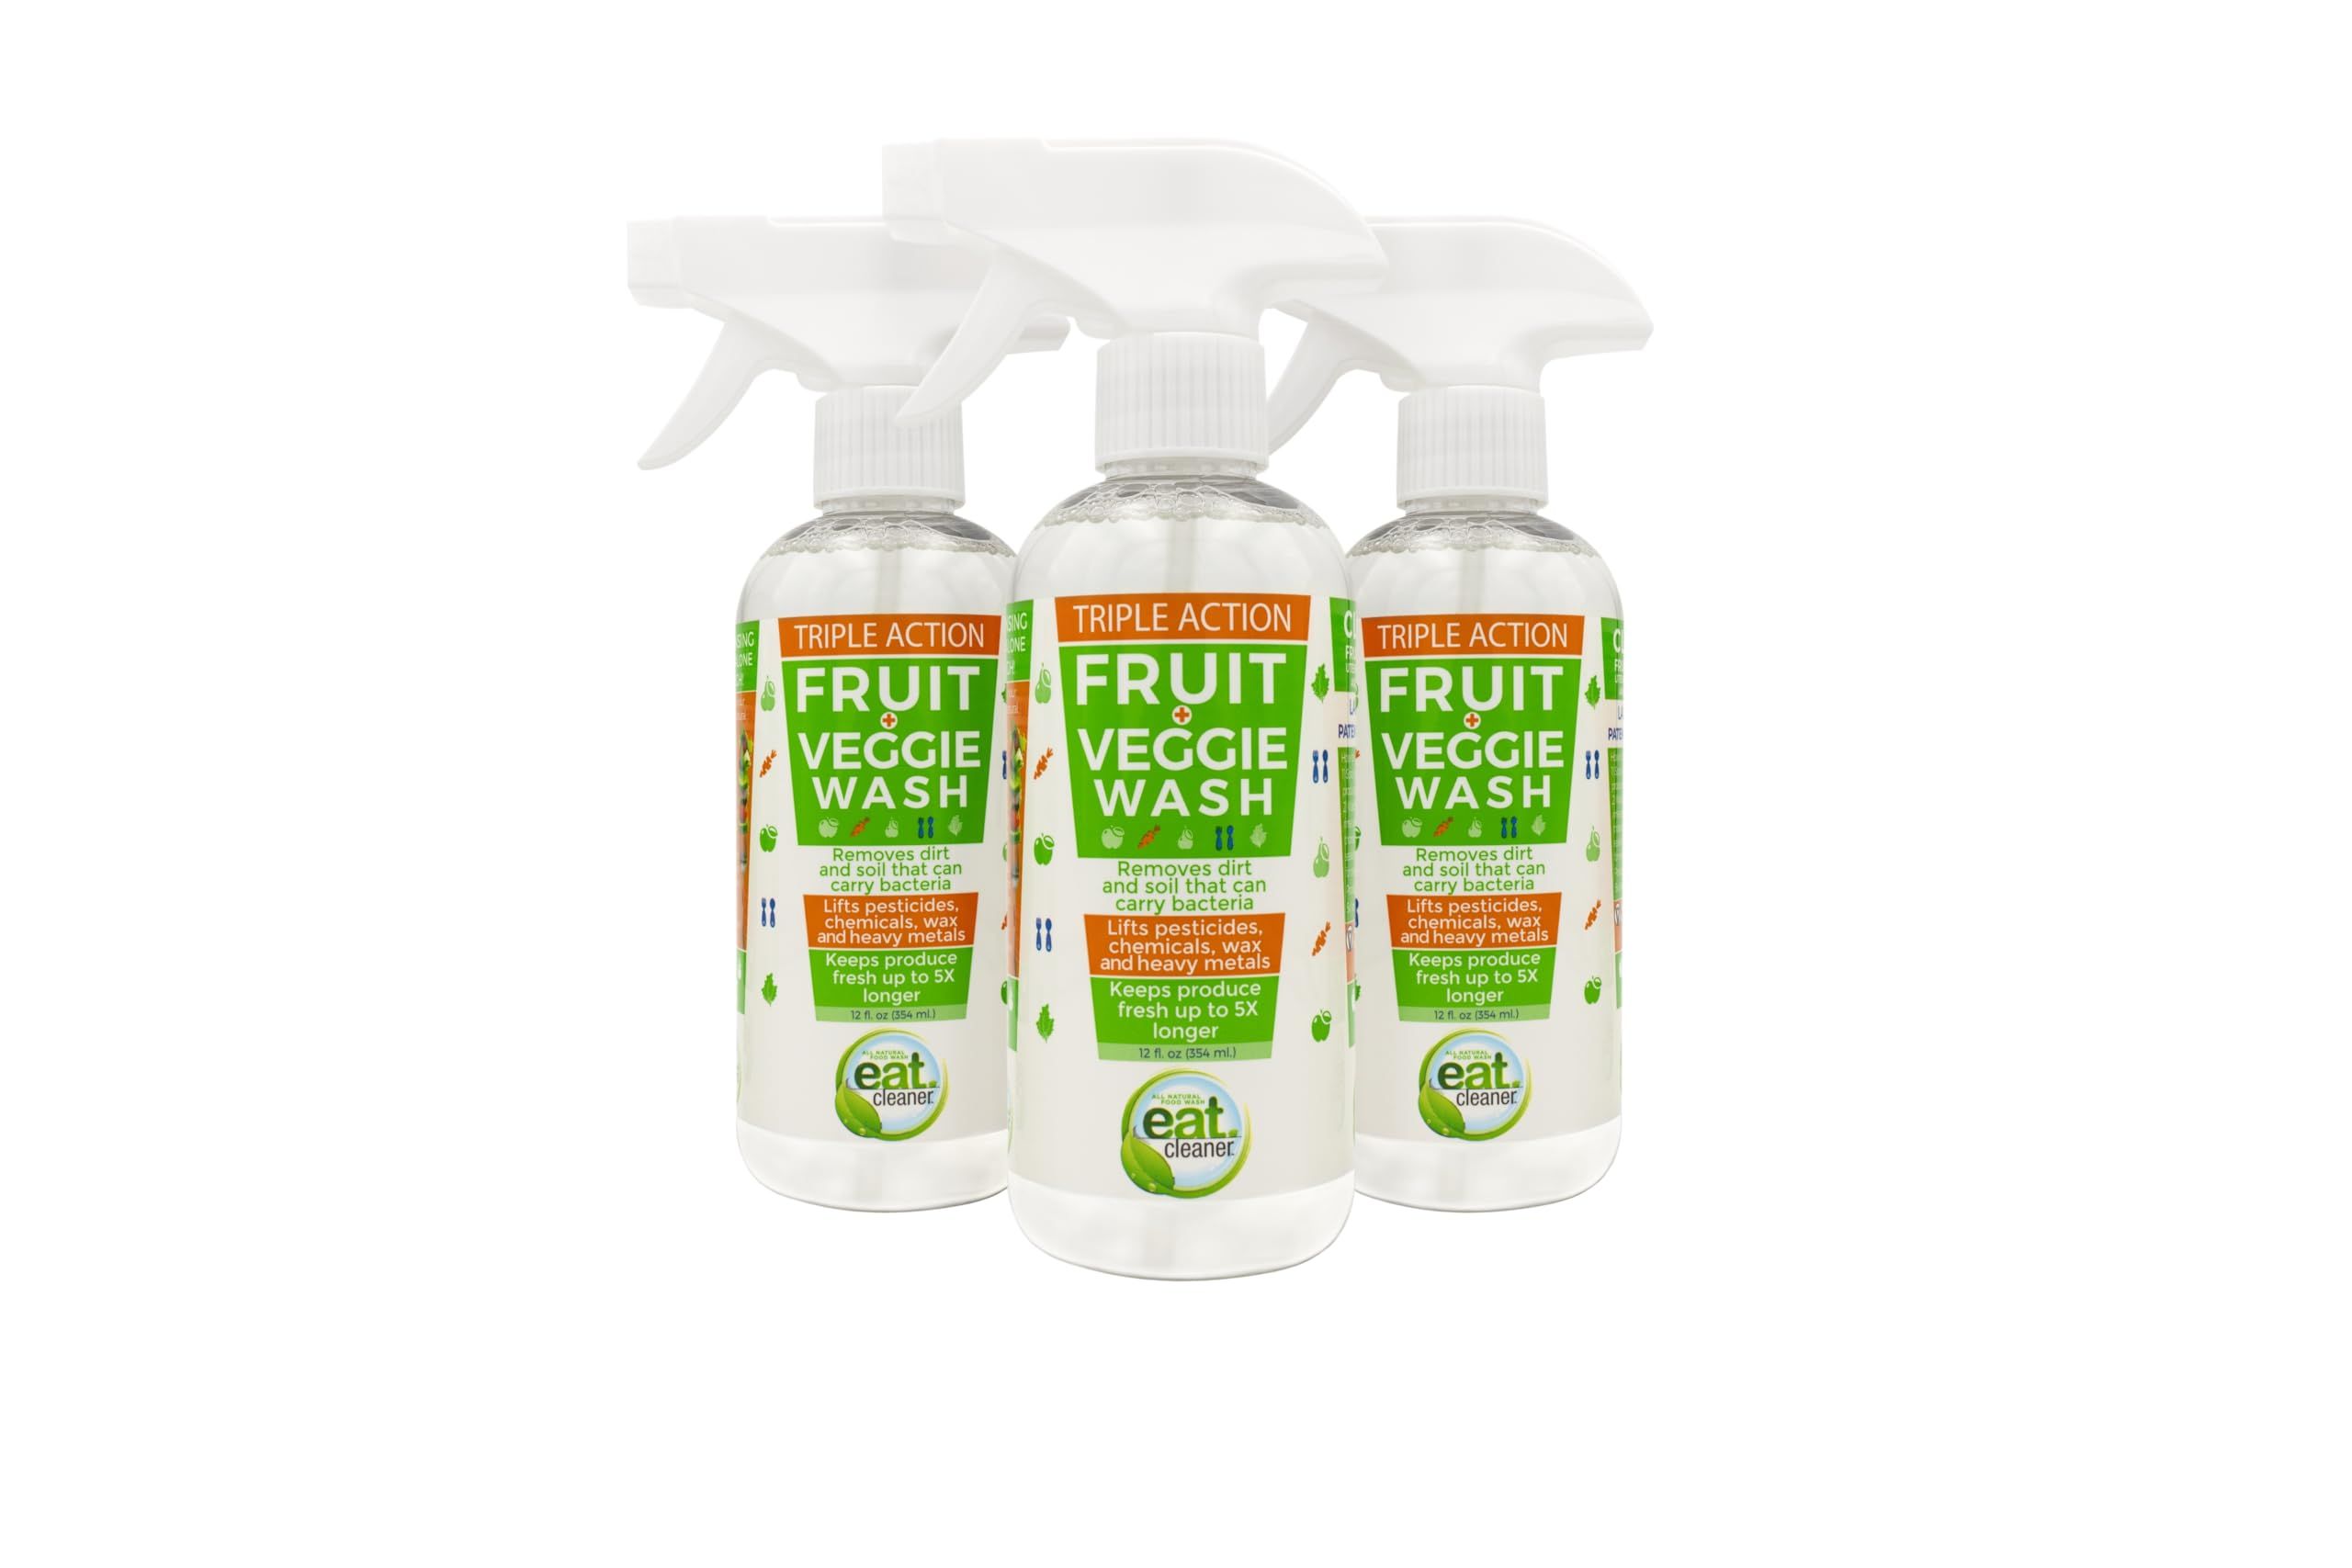 Eat Cleaner Fruit and Vegetable Wash Spray Removes Pesticides Water Can\u2019t. Eliminates 99.9% ... | Amazon (US)